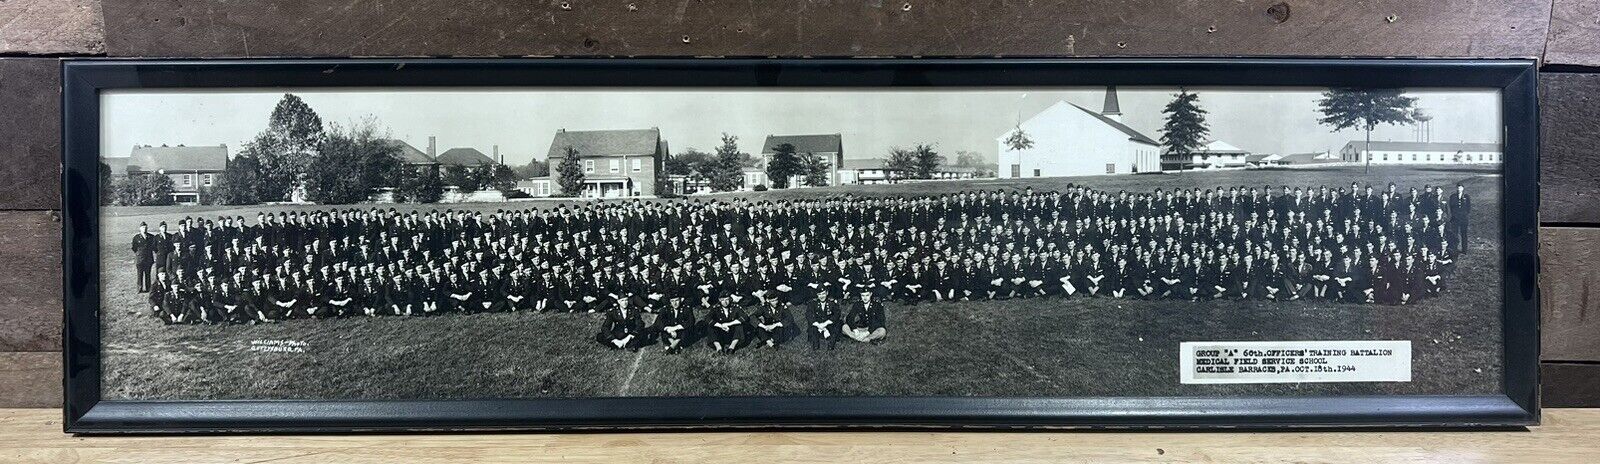 Vintage 1944 Group A 60th Officers Training Battalion Medical Field School Photo